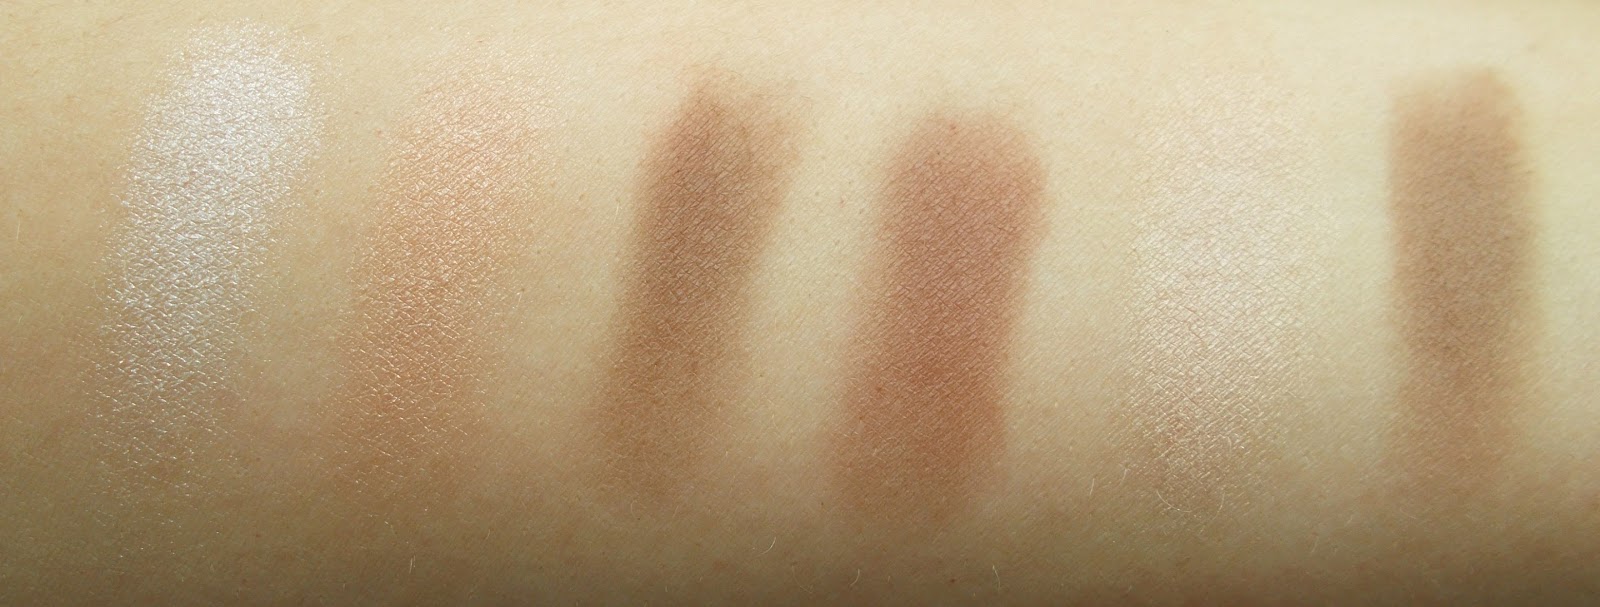 kevyn aucoin contour book volume 1 swatches review